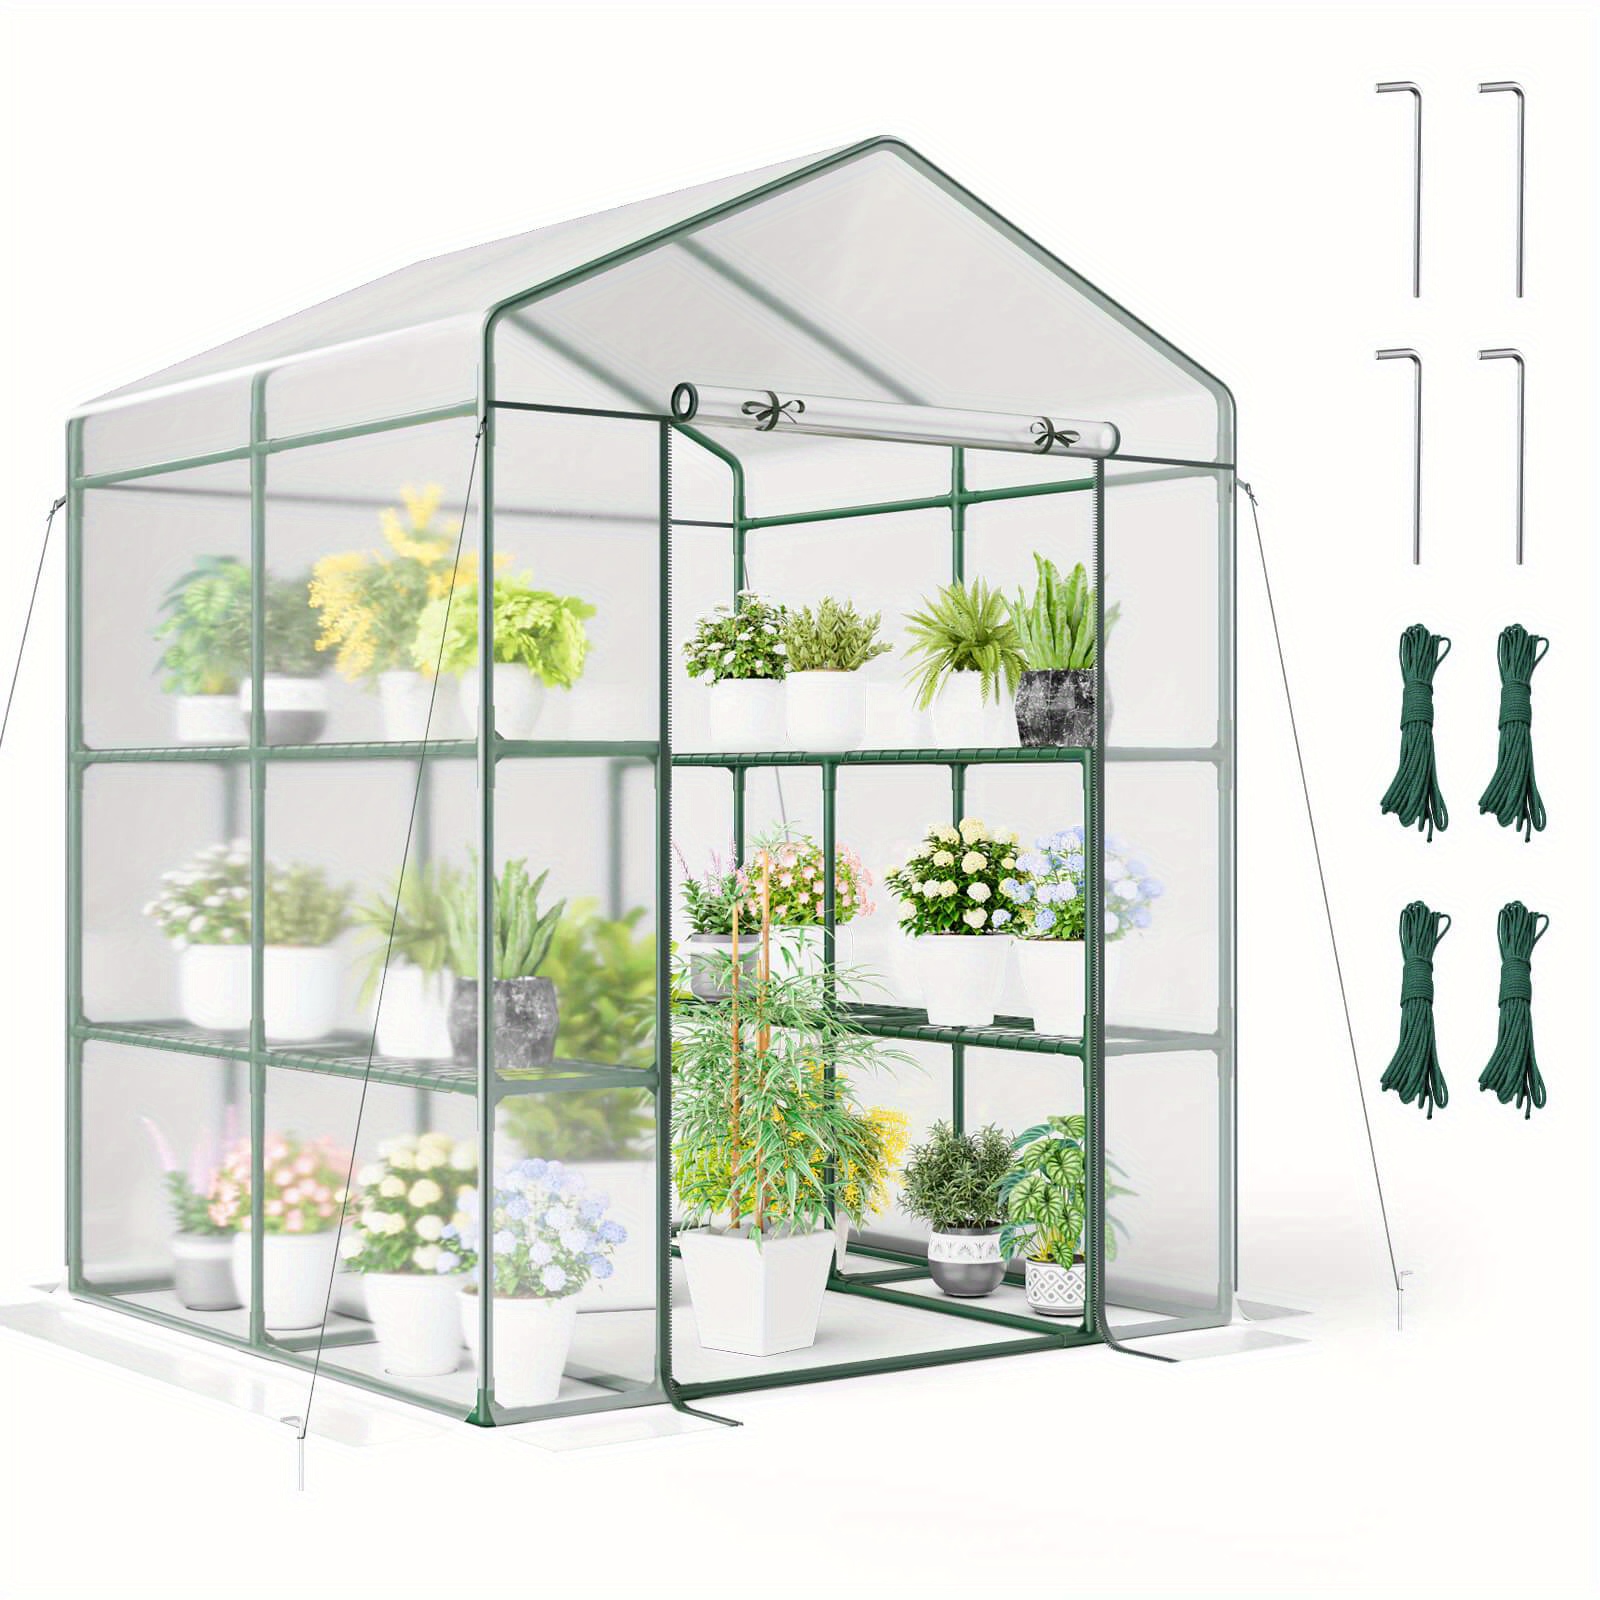 

Portable Mini Greenhouse W/4 Tiers 8 Shelves Roll-up Zippered Door For Plants